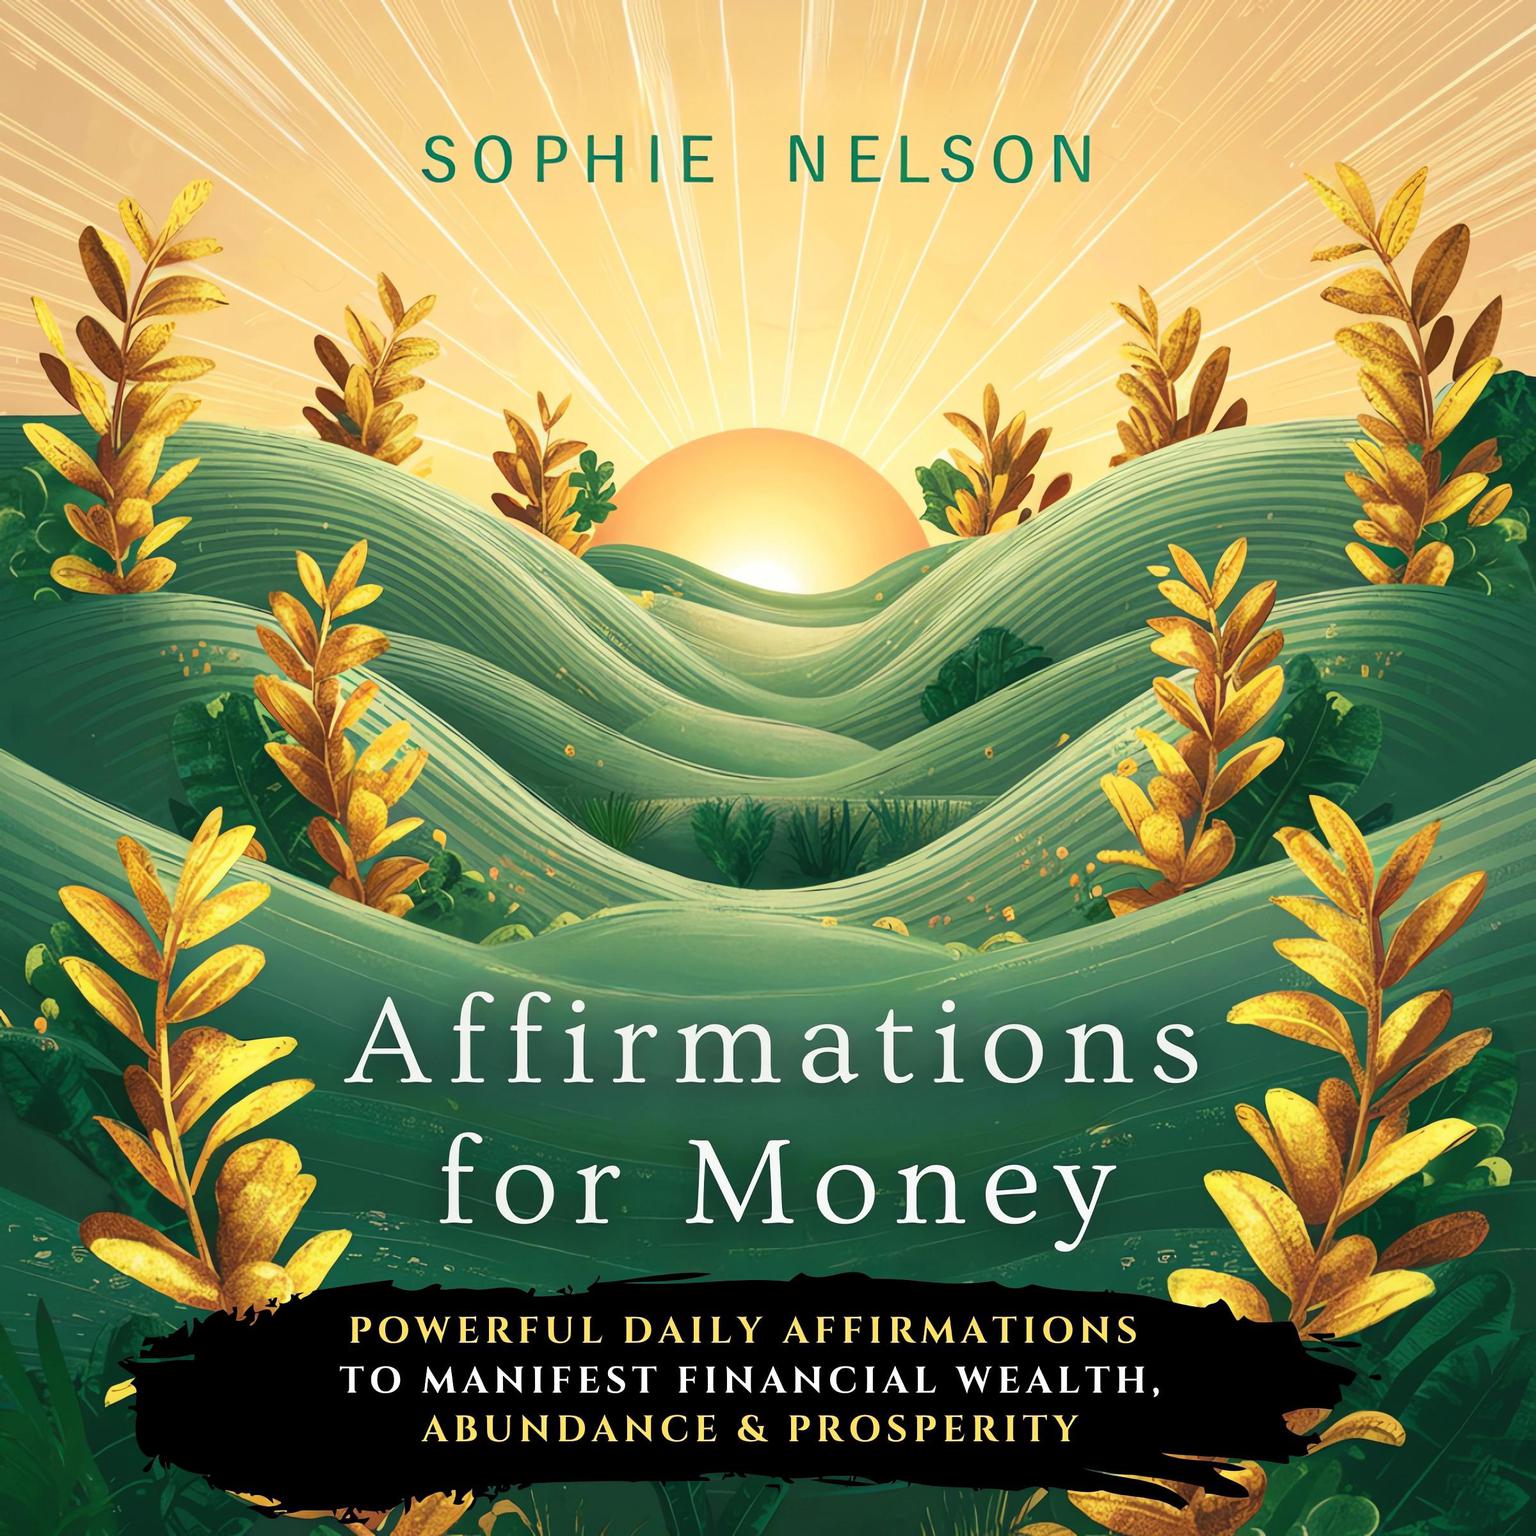 Affirmations For Money: Powerful Daily Affirmations to Manifest Financial Wealth, Abundance & Prosperity Audiobook, by Sophie Nelson